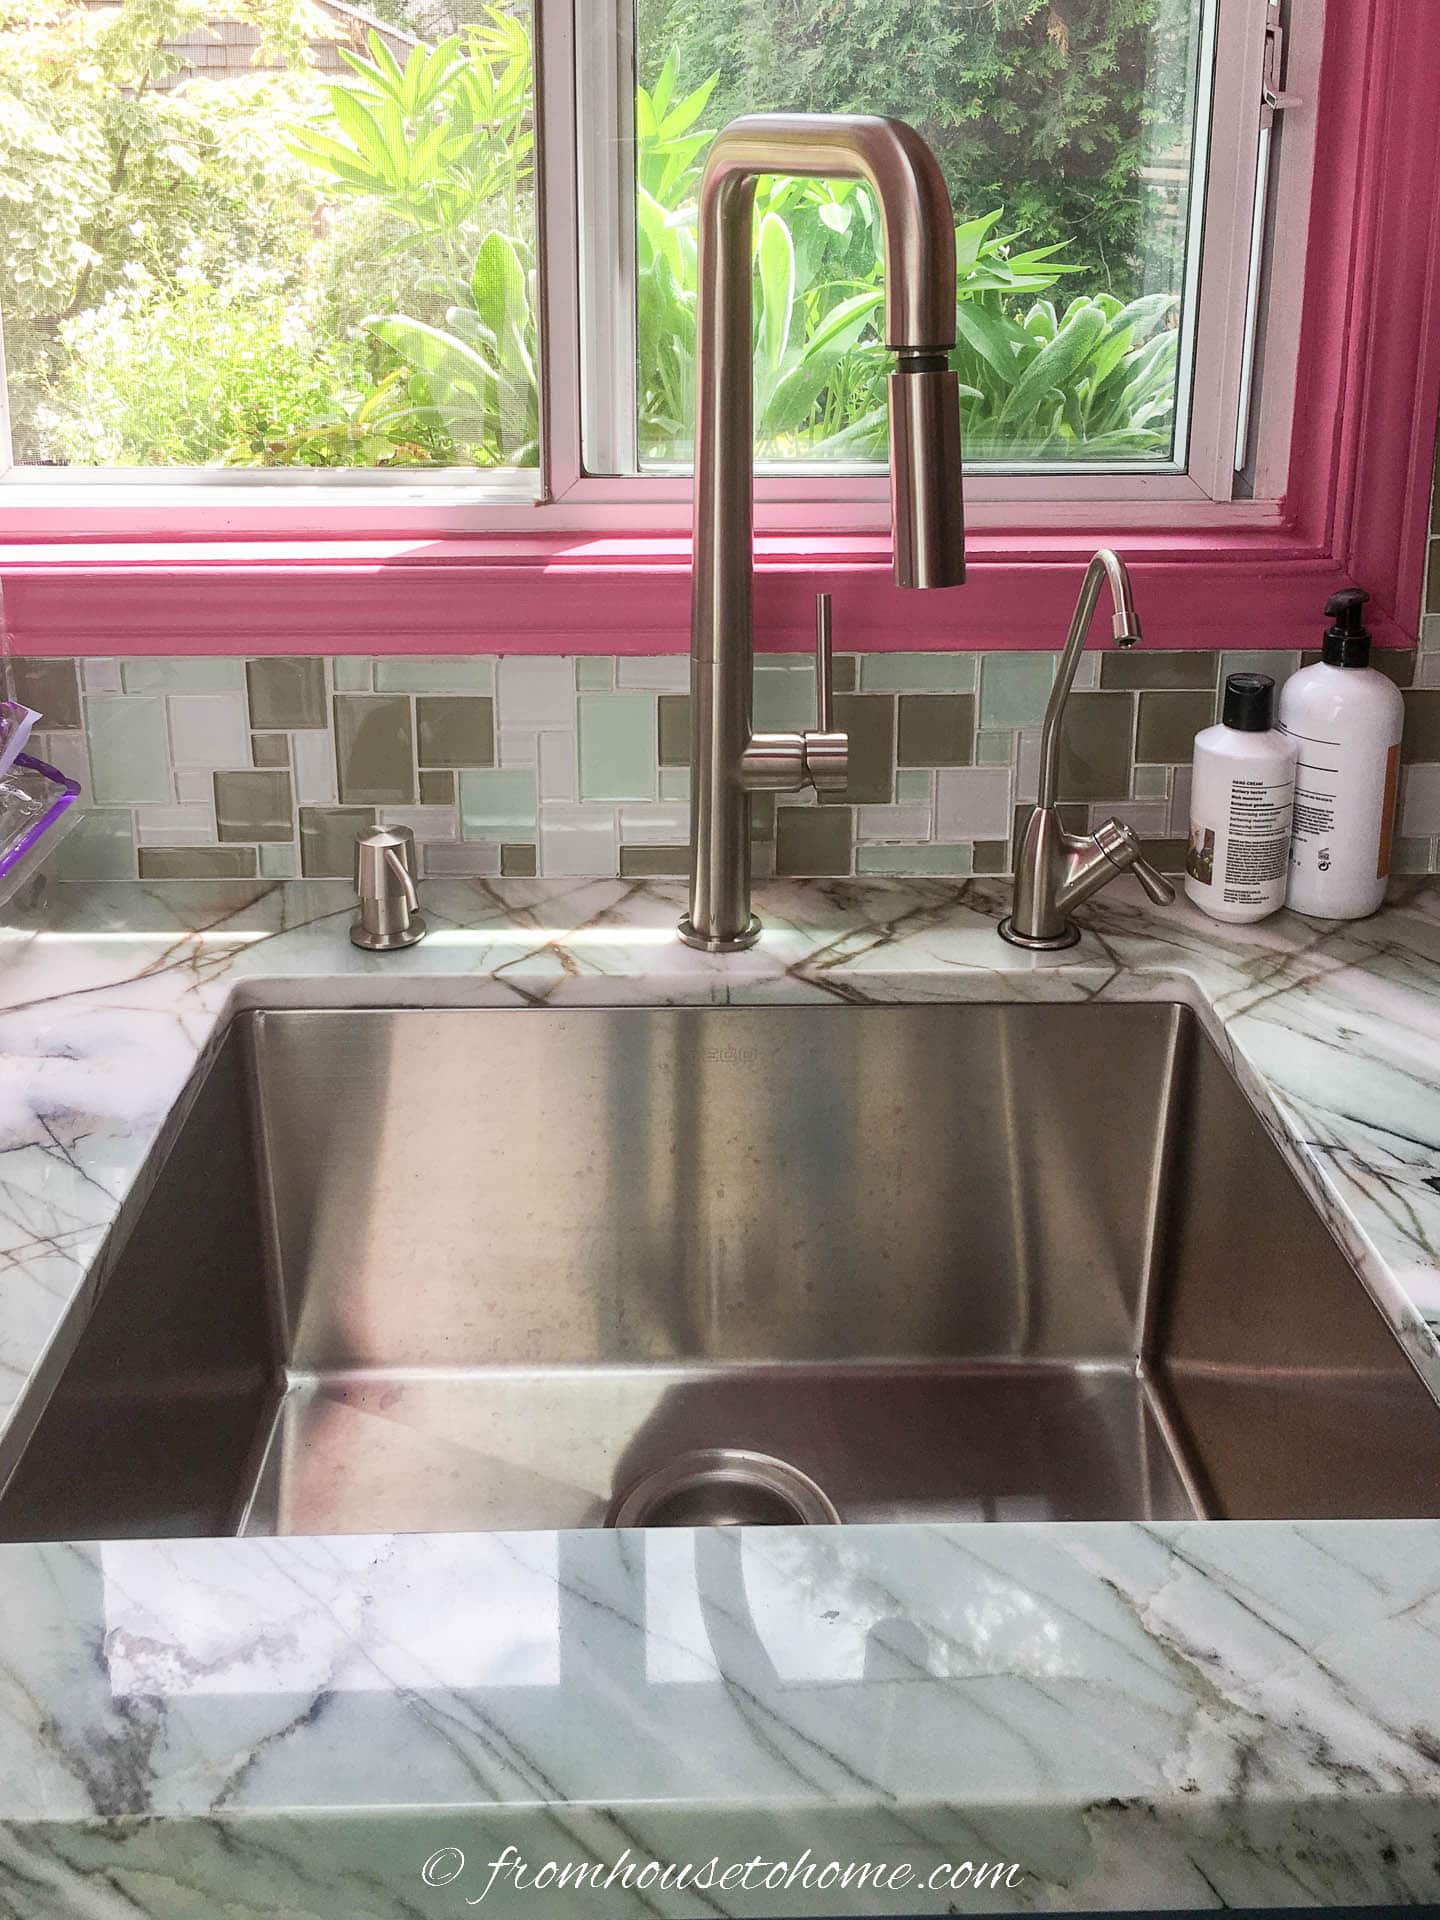 "After" picture of the large single kitchen sink with a tall faucet and soap dispenser